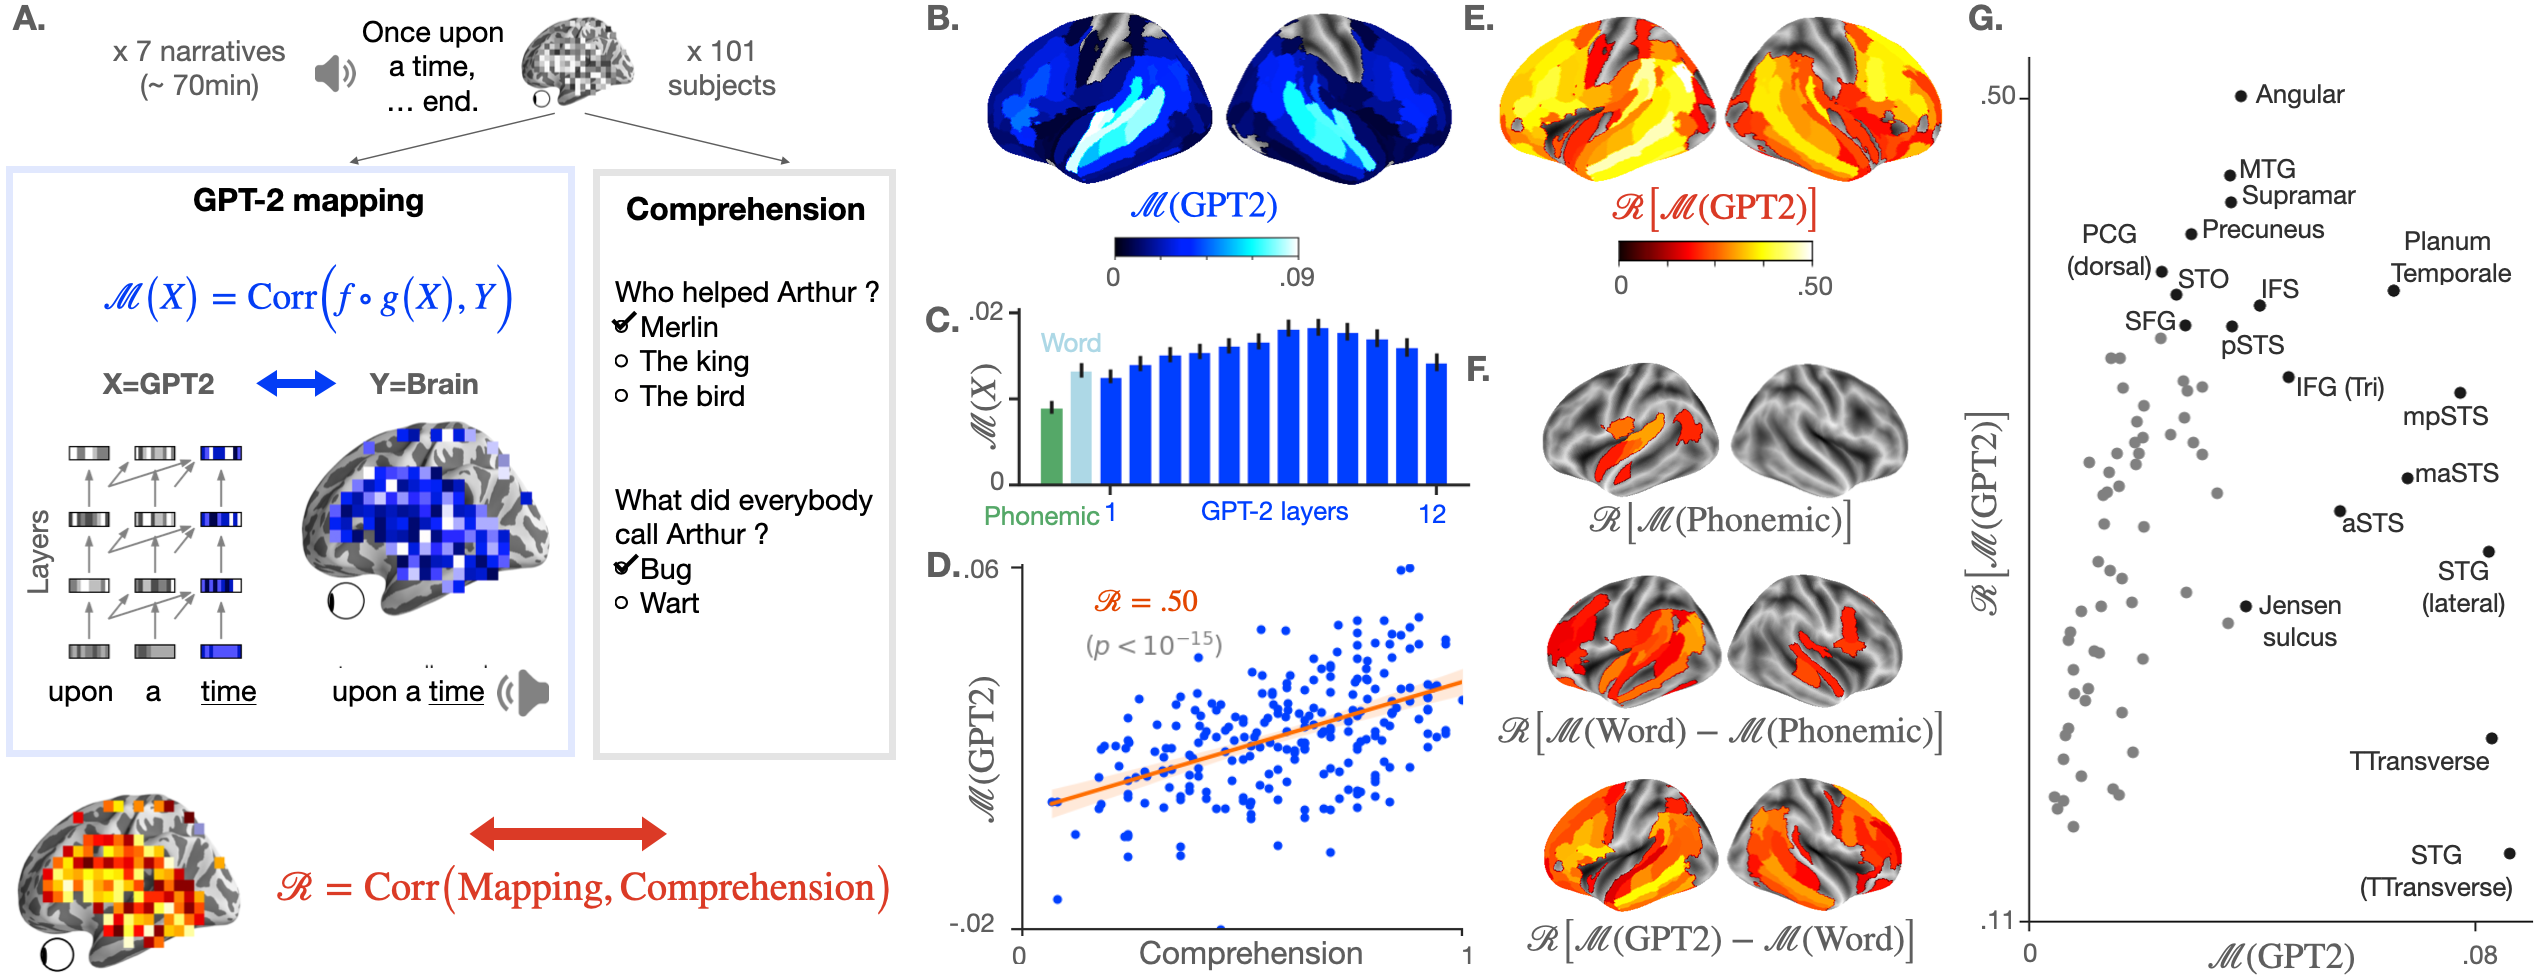 Deep language algorithms predict semantic comprehension from brain activity.A. 101 subjects listen to narratives (70 min of unique audio stimulus in total) while their brain signal is recorded using functional MRI. At the end of each story, a questionnaire is submitted to each subject to assess their understanding, and the answers are summarized into a comprehension score specific to each (narrative, subject) pair (grey box). In parallel (blue box on the left), we measure the mapping between the subject's brain activations and the activations of GPT2, a deep network trained to predict a word given its past context, both elicited by the same narrative. To this end, a linear spatio-temporal model is fitted to predict the brain activity of each voxel, given GPT2 activations as input. The degree of mapping, called "brain score" is defined for each voxel as the Pearson correlation between predicted and actual brain activity on held-out data. B. Brain scores (fMRI predictability) of the activations of the eighth layer of GPT2. Only significant regions are displayed. C. Brain scores, averaged across fMRI voxels, for different activation spaces: phonological features (word rate, phoneme rate, phonemes, tone and stress, in green), the non-contextualized word embedding of GPT2 ("Word", light blue) and the activations of the contextualized layers of GPT2 (from layer one to layer twelve, in blue). D. Comprehension and GPT2 brain scores, averaged across voxels, for each (subject, narrative) pair. In red, Pearson's correlation between the two (denoted ℛ\mathcal {R}), the corresponding regression line and the 95% confidence interval of the regression coefficient. E. Correlations (ℛ\mathcal {R}) between comprehension and brain scores over regions of interest. Only significant correlations are displayed (threshold: .05). F. Correlation scores (ℛ\mathcal {R}) between comprehension and the subjects' brain mapping with phonological features (ℳ( Phonemic \mathcal {M}(\mathrm {Phonemic}) (i), the share of the word-embedding mapping that is not accounted by phonological features ℳ( Word )-ℳ( Phonemic )\mathcal {M}(\mathrm {Word}) - \mathcal {M}(\mathrm {Phonemic}) (ii) and the share of the GPT2 eighth layer's mapping not accounted by the word-embedding ℳ( GPT 2)-ℳ( Word )\mathcal {M}(\mathrm {GPT2}) - \mathcal {M}(\mathrm {Word}) (iii). G. Relationship between the average GPT2-to-brain mapping (eighth layer) per region of interest (similar to B.), and the corresponding correlation with comprehension (ℛ\mathcal {R}, similar to D.). Only regions of the left hemisphere, significant in both B. and E. are displayed.
